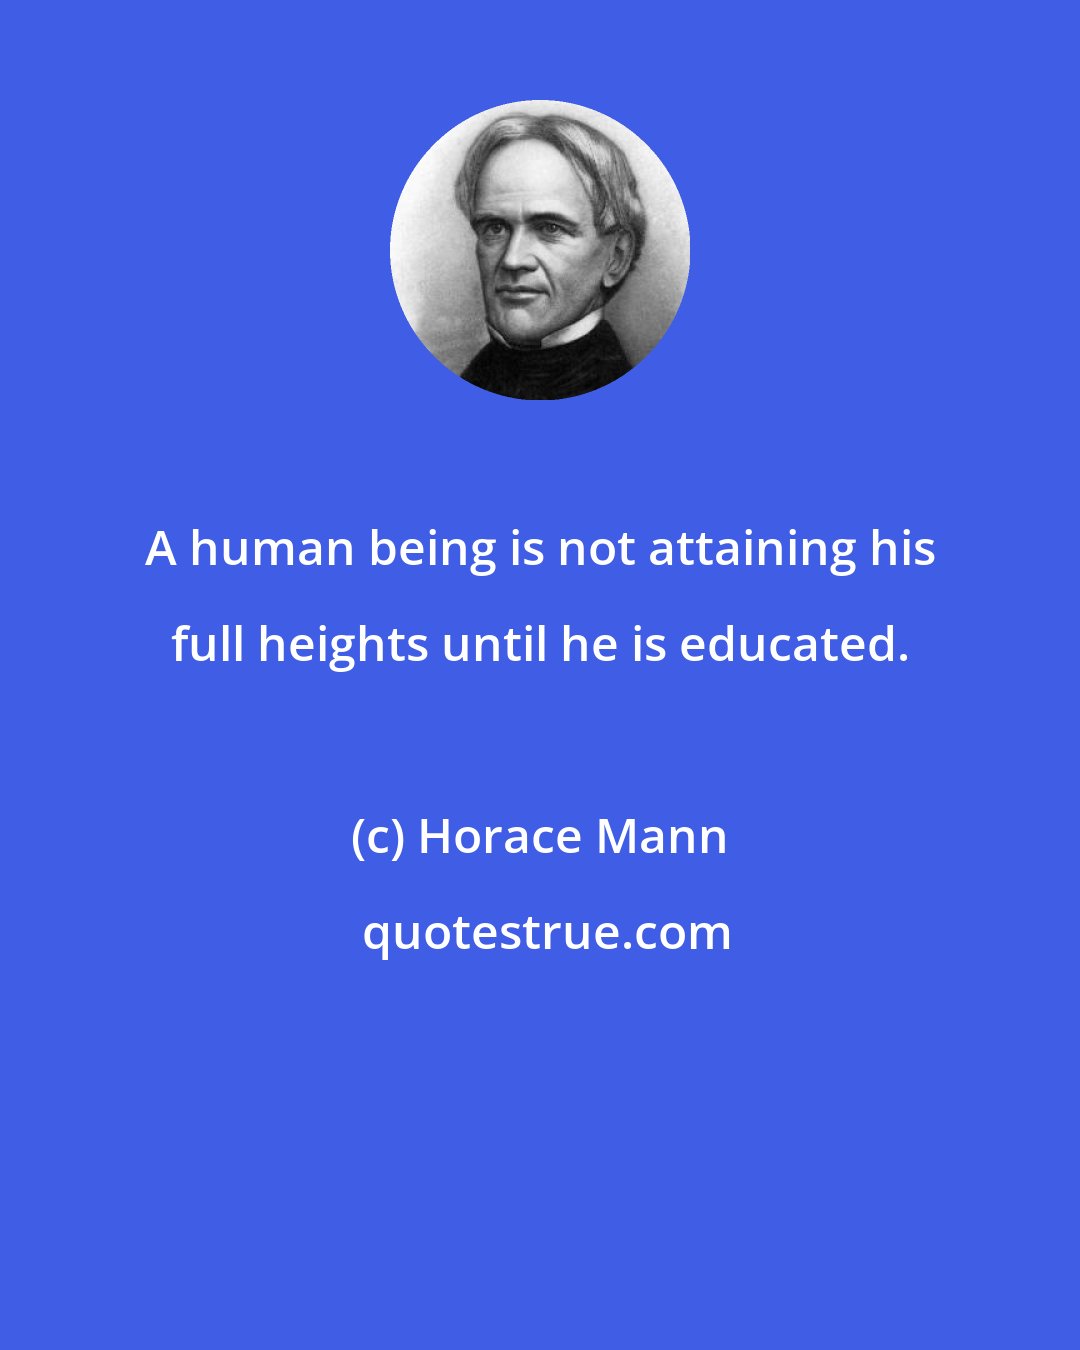 Horace Mann: A human being is not attaining his full heights until he is educated.